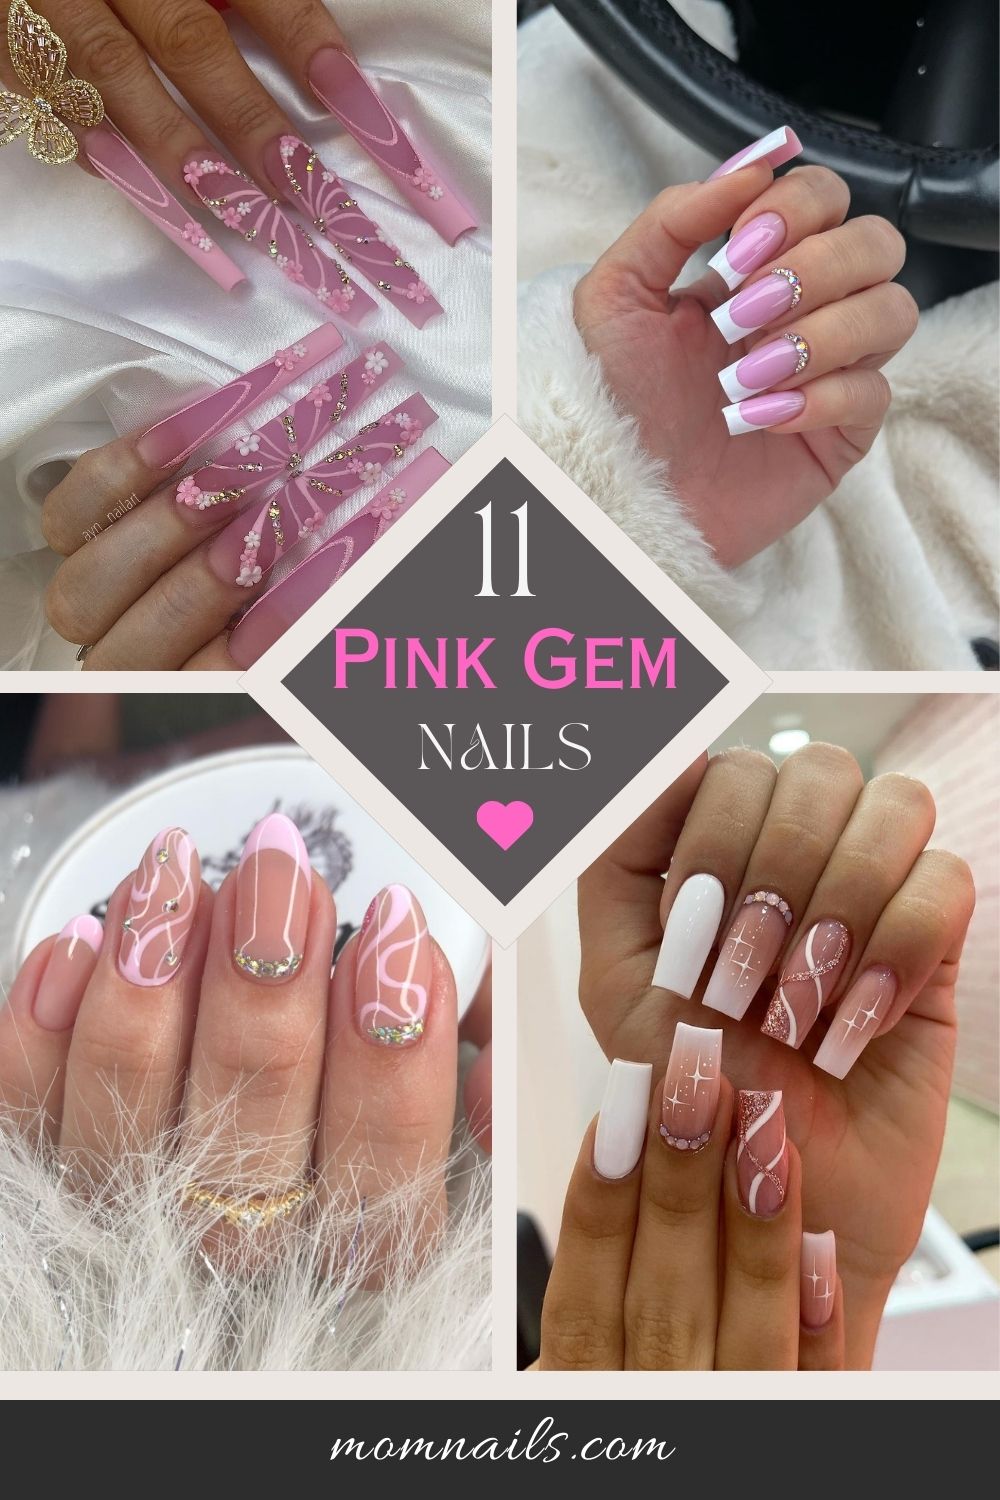 11 Pink Gem Nails Ideas that Will Leave Everybody in Awe